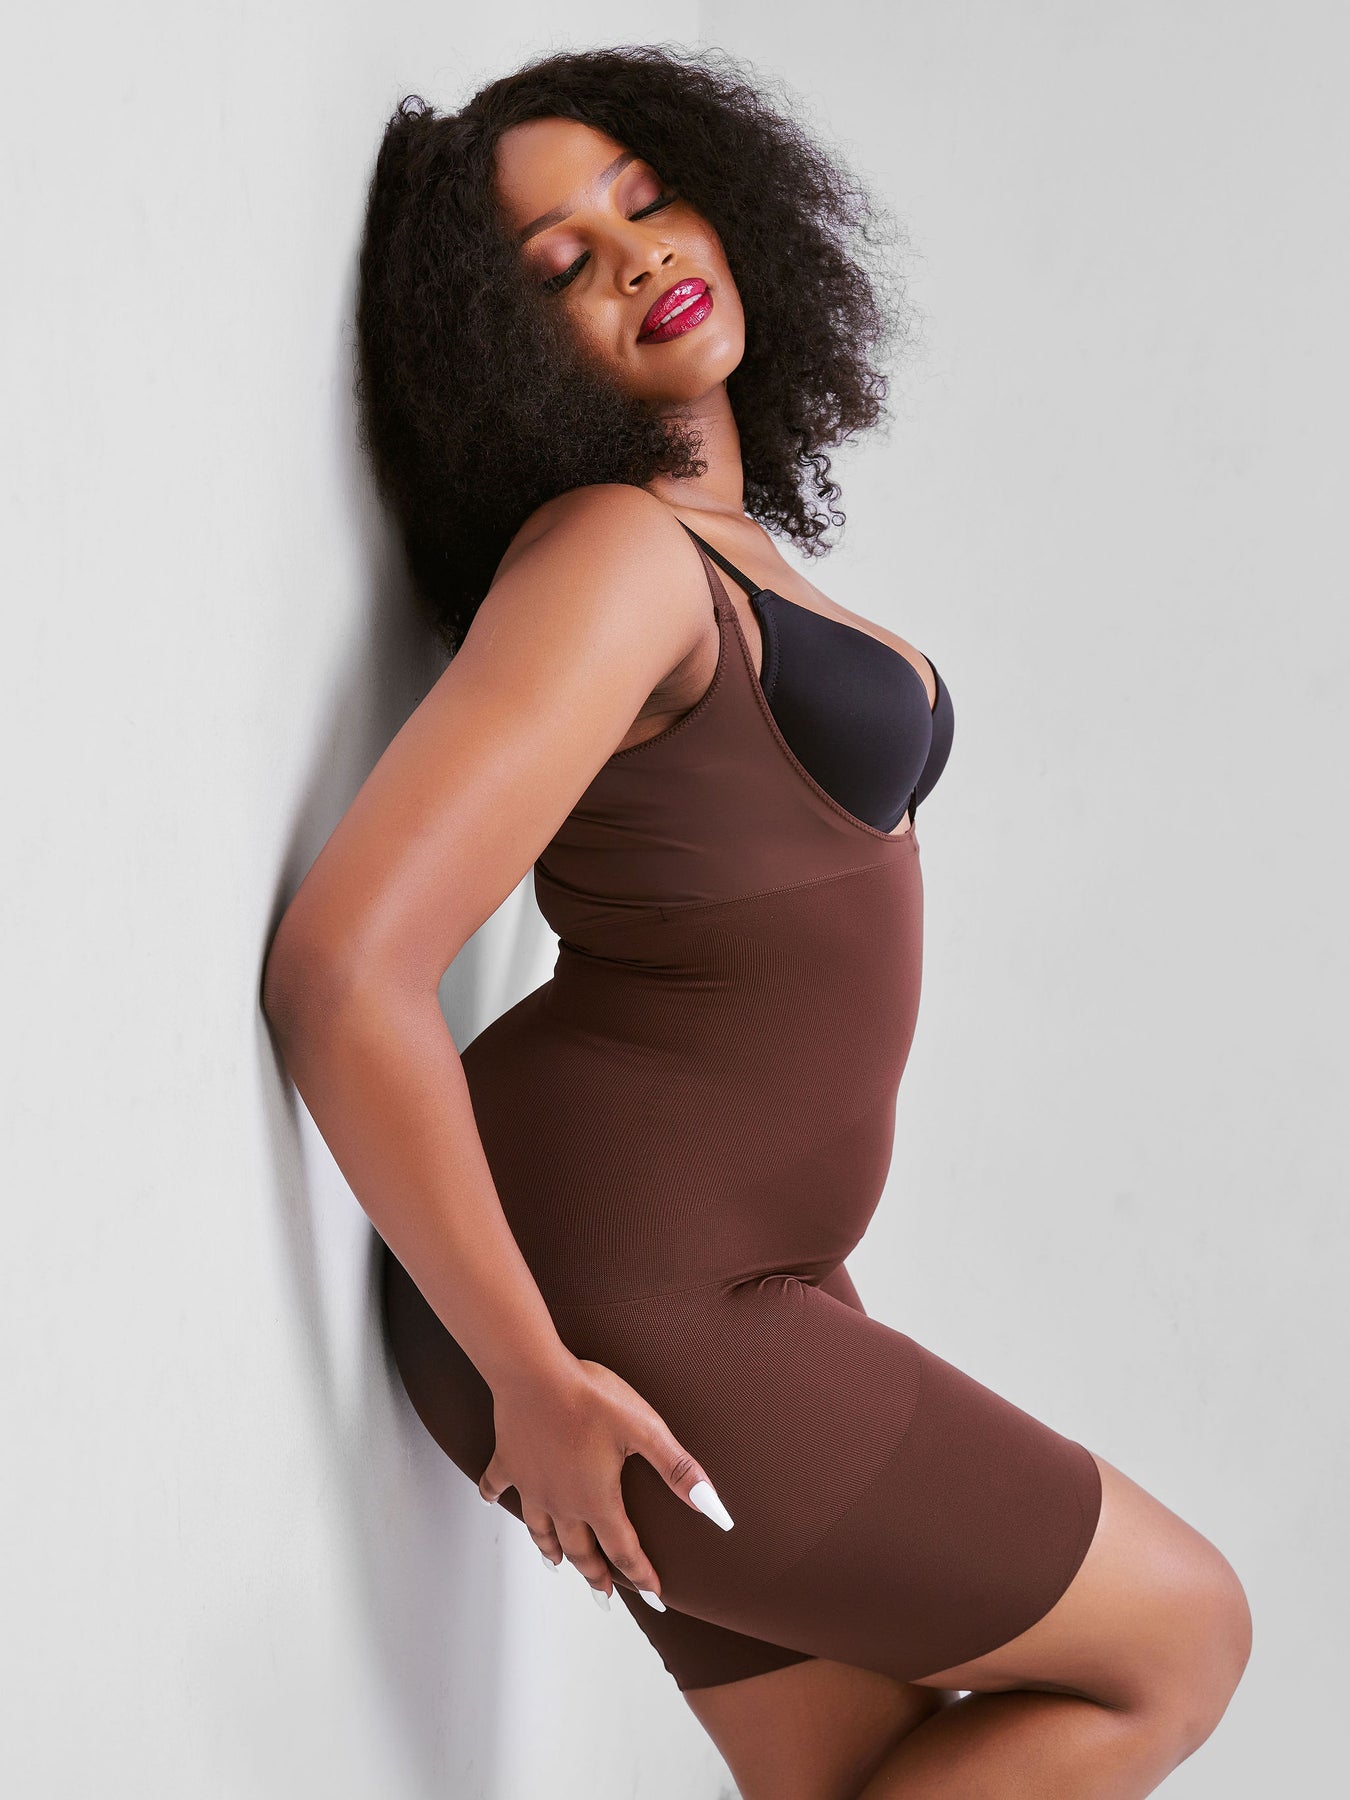 LadyLuck Shapewear on Instagram: Ready to serve you at